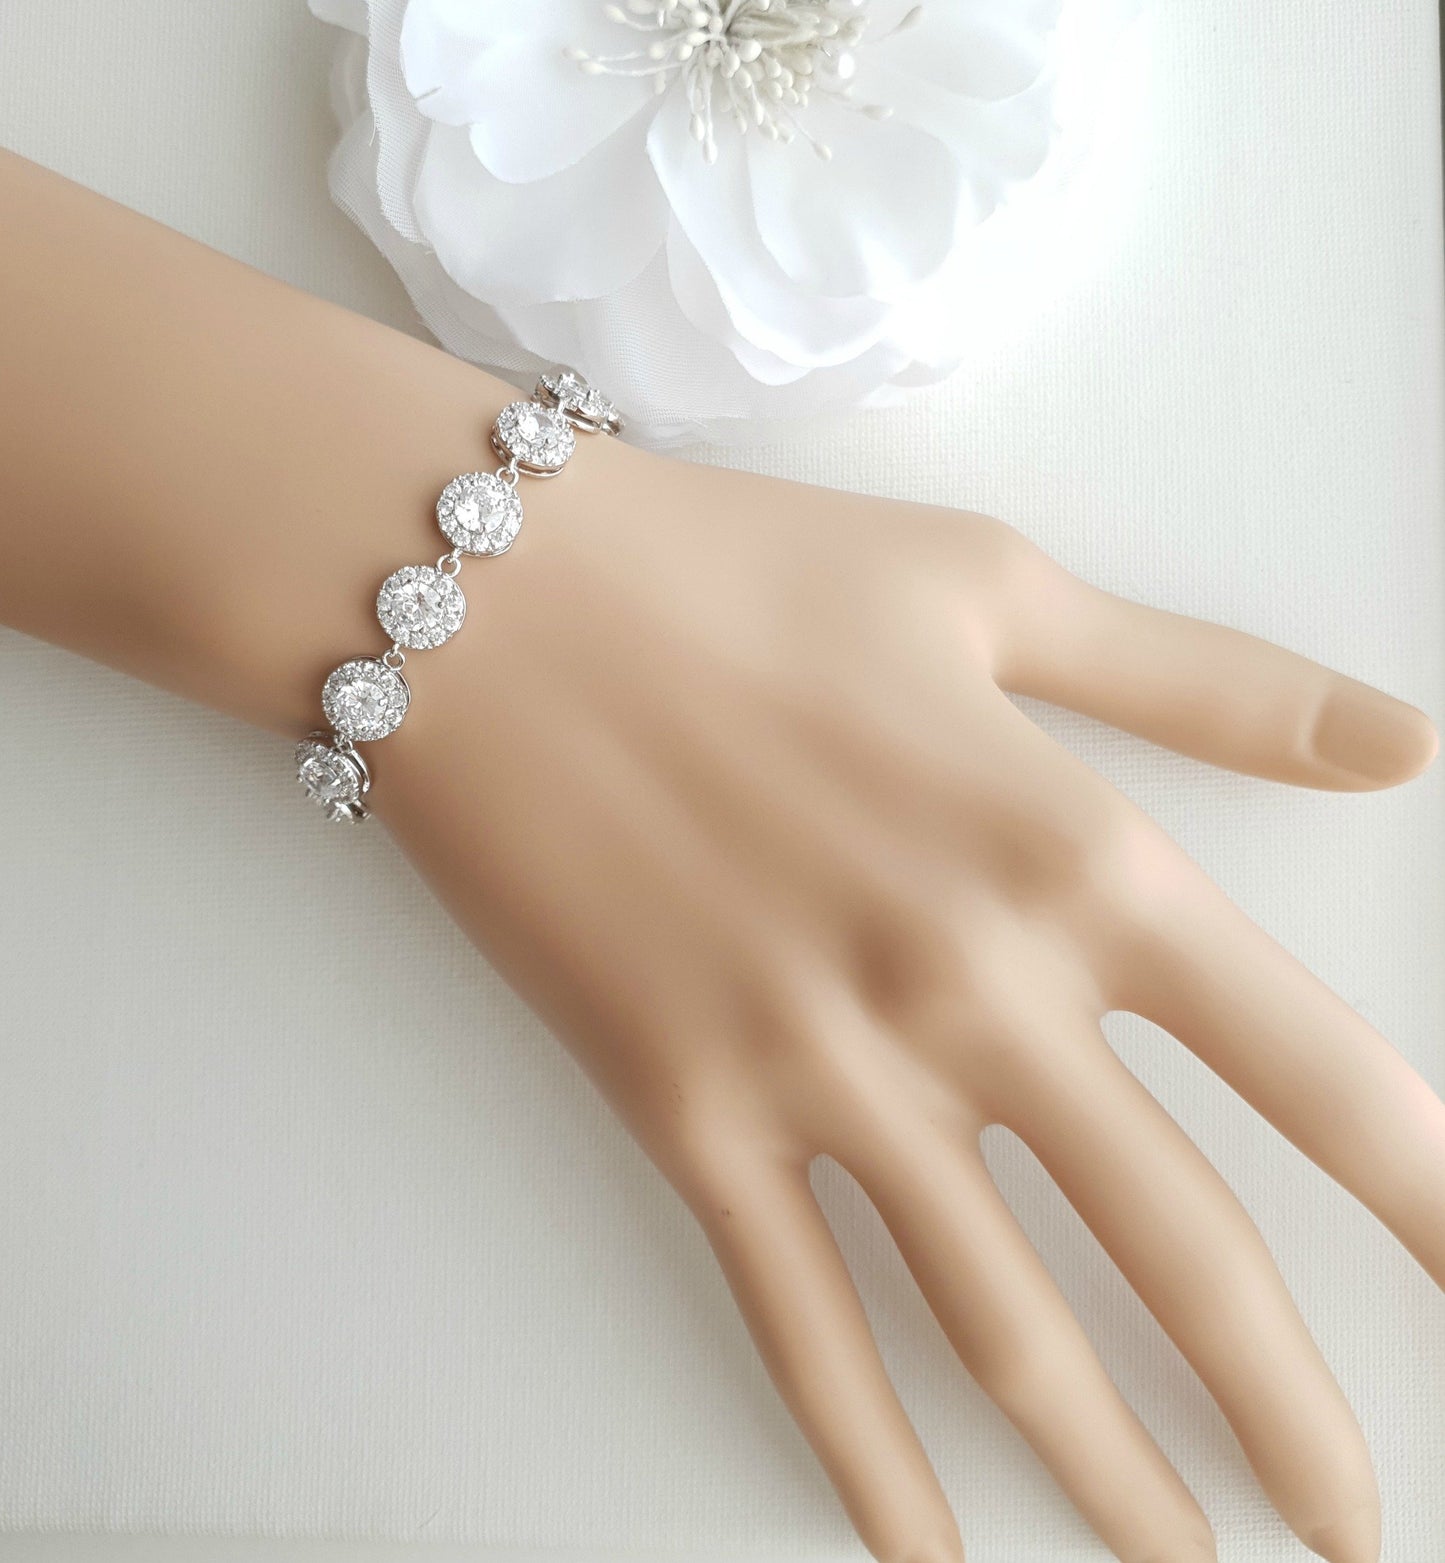 Gold Bridal Bracelet for Weddings in Round Cubic Zirconia -Cristle - PoetryDesigns